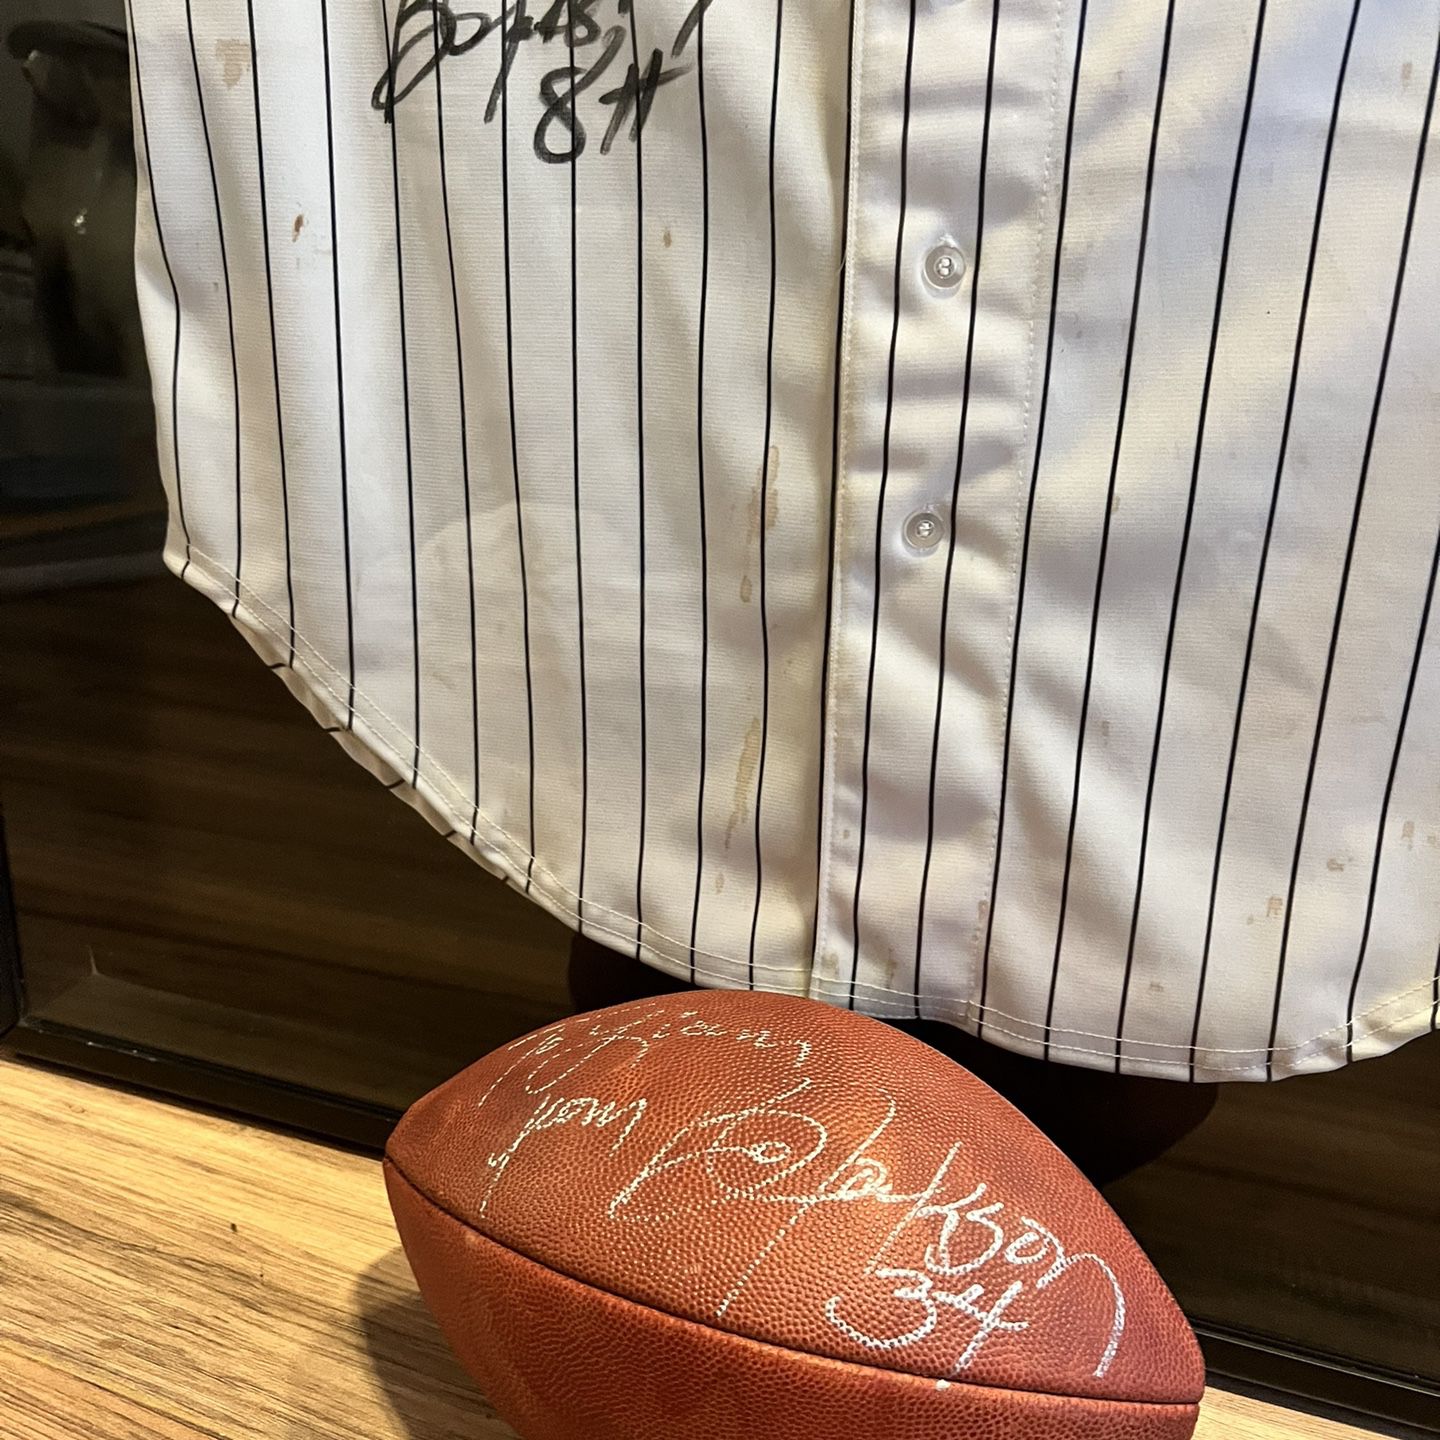 Bo Jackson Signed Jersey And Football In Display Case for Sale in Chicago,  IL - OfferUp